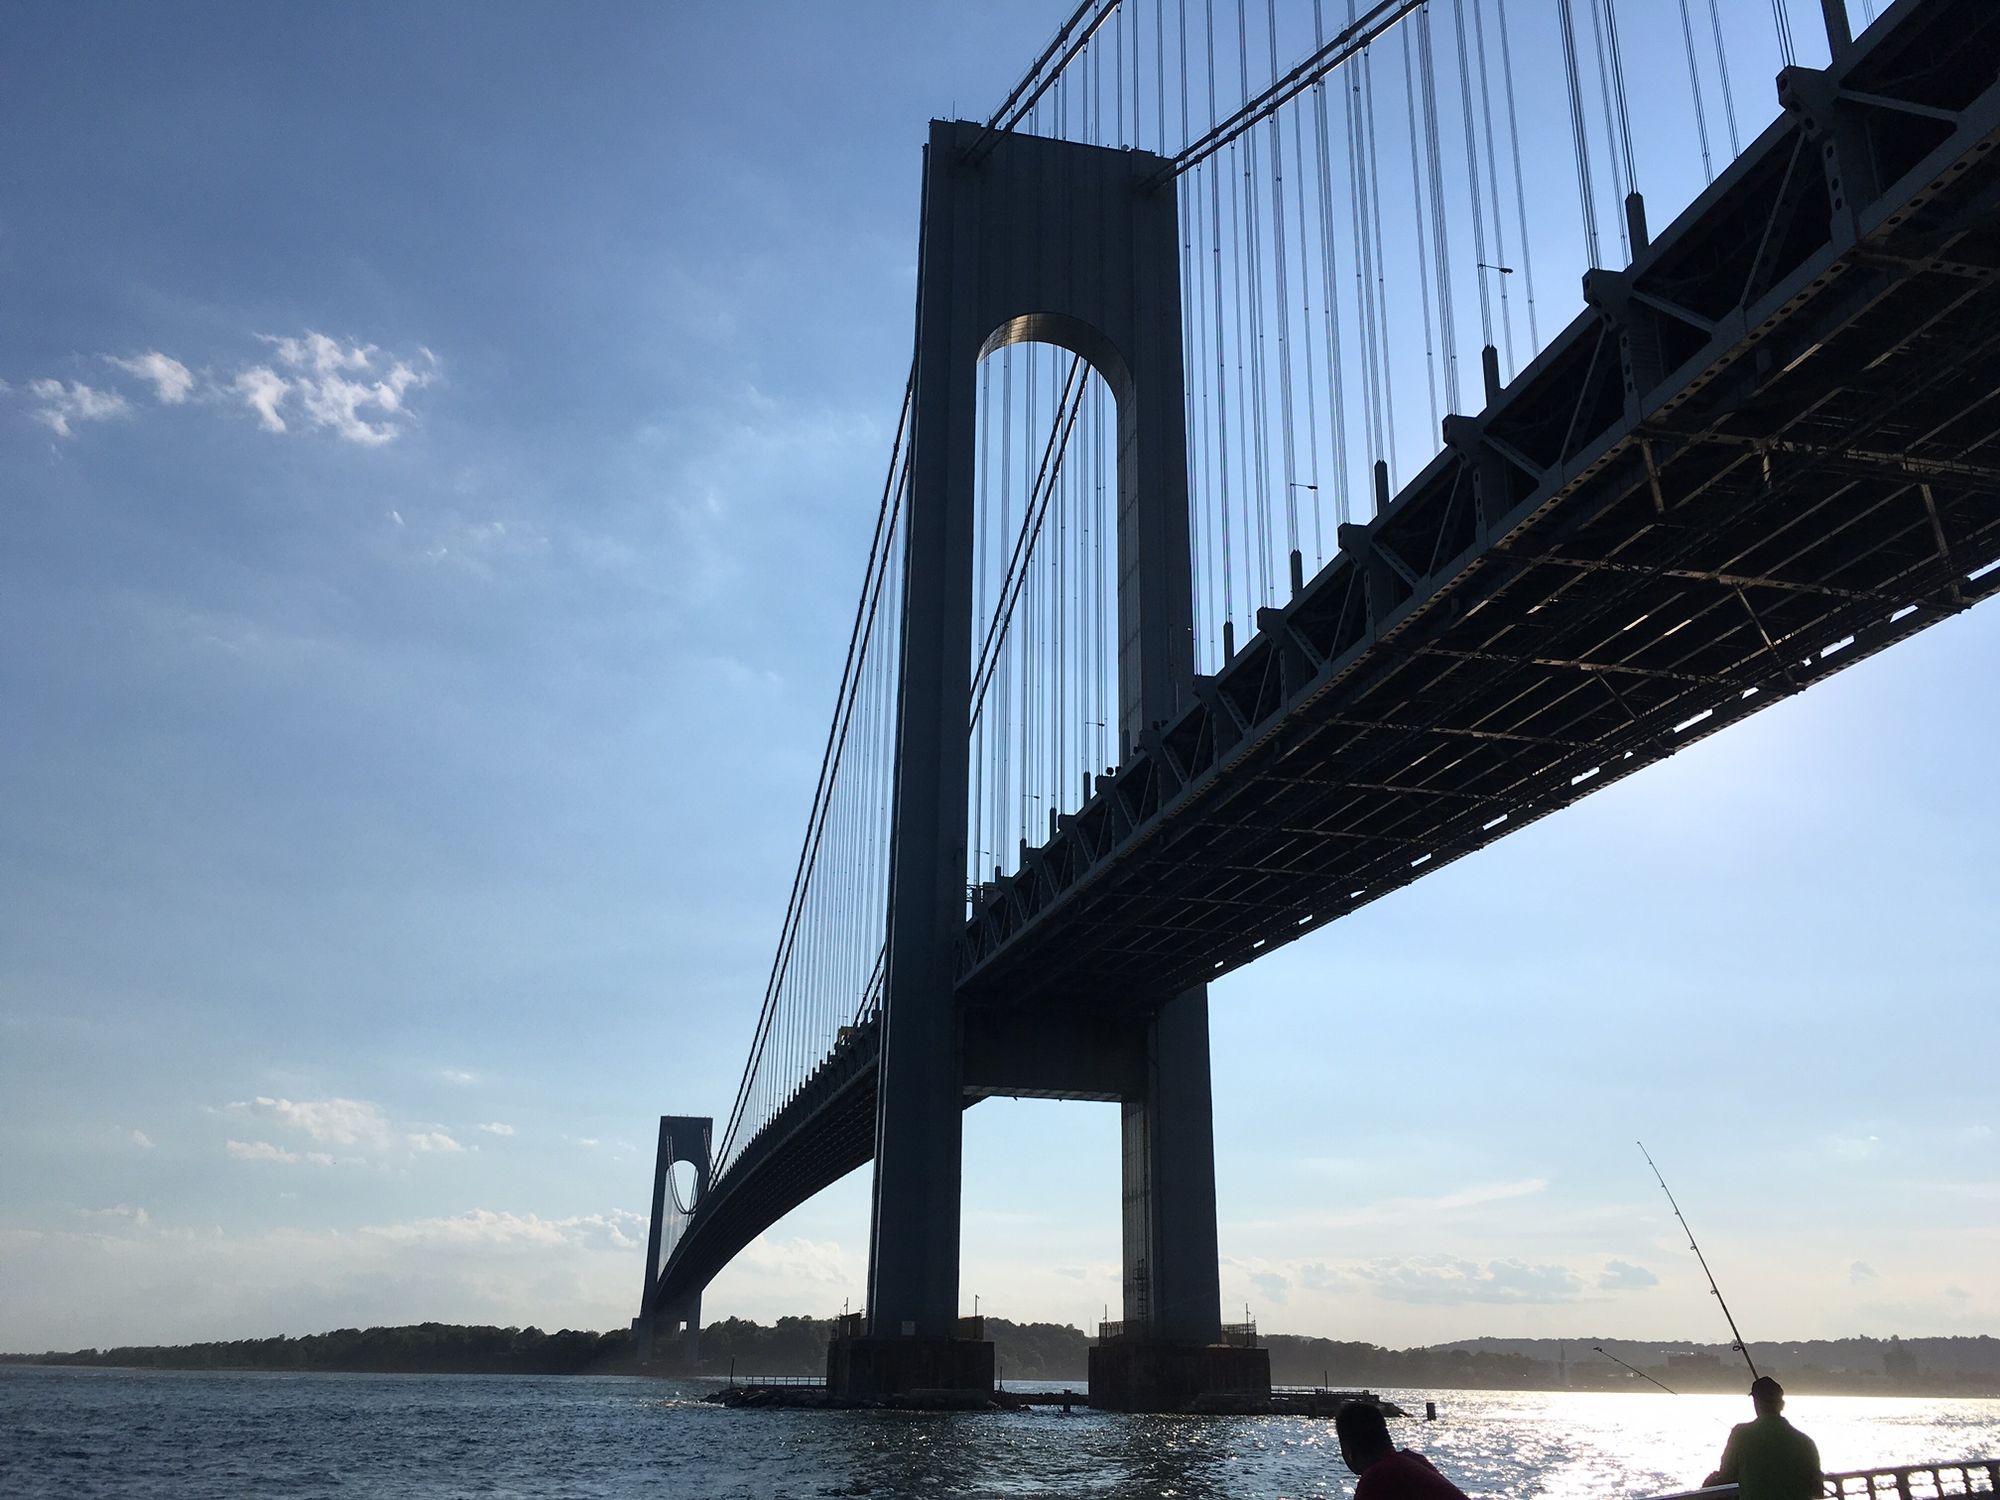 The Down-Low: 5 Hour Standoff On Verrazano Bridge & Other Stories You Shouldn’t Miss